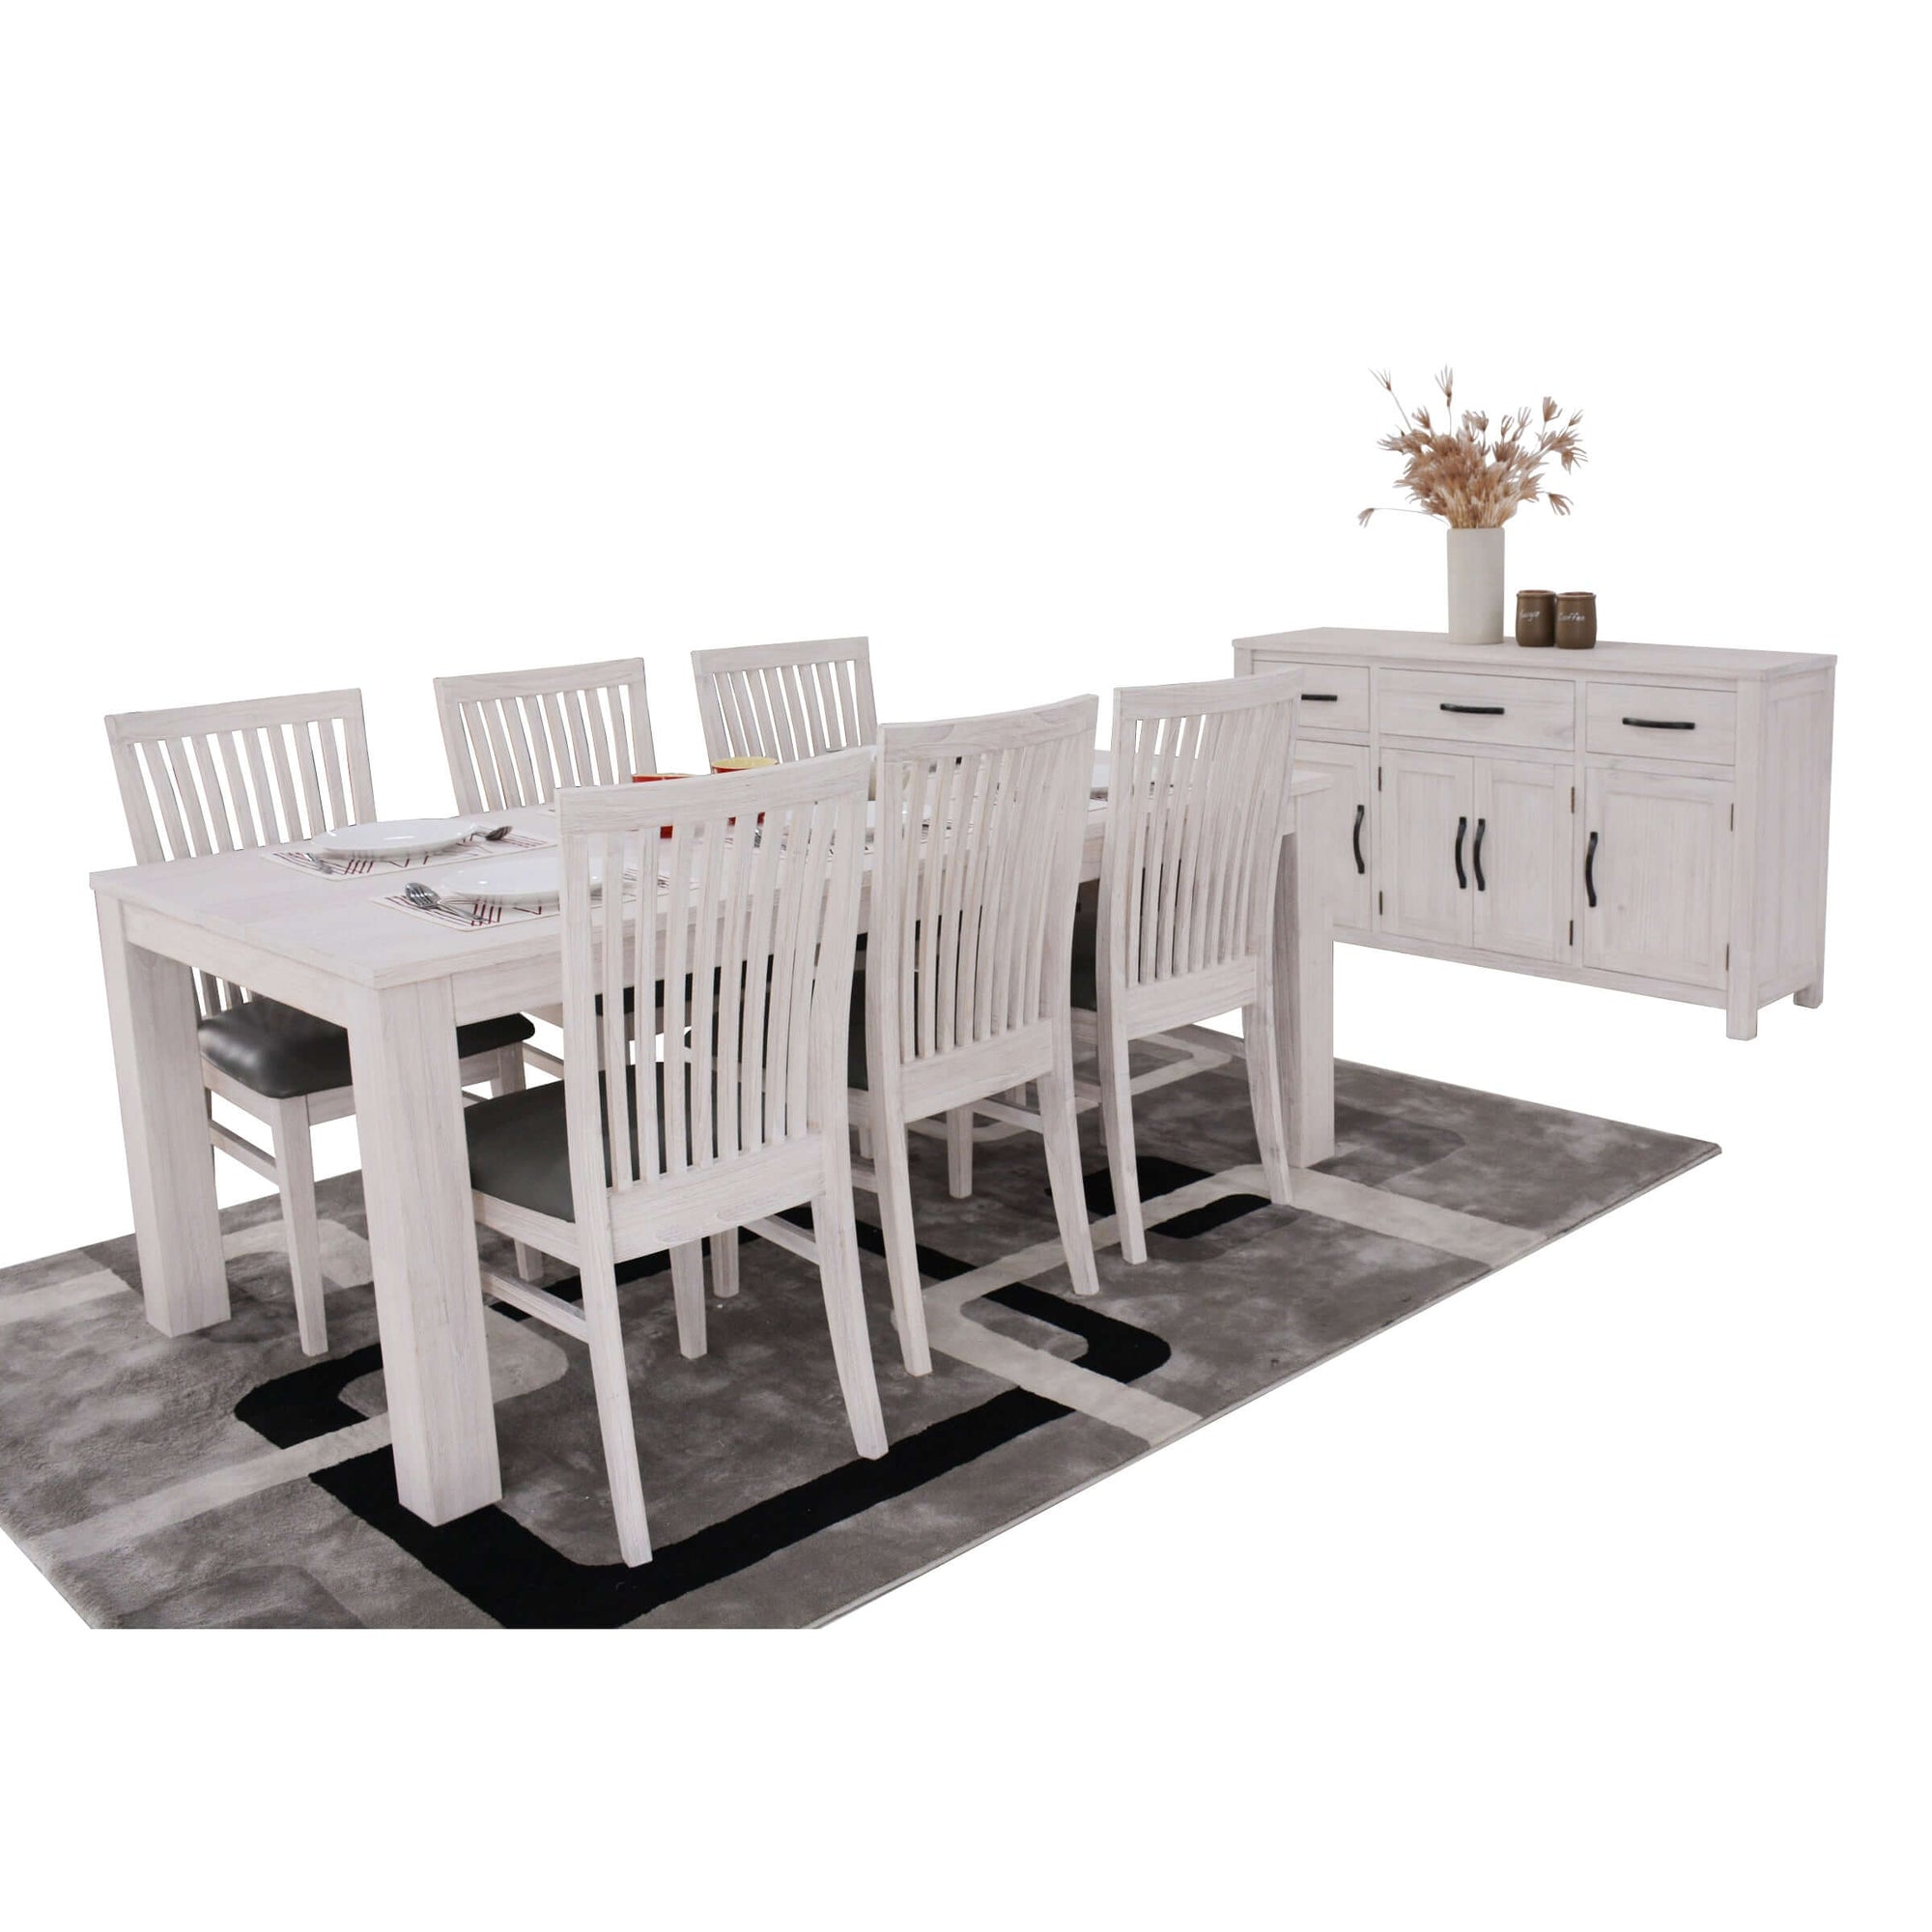 Foxglove Dining Table 225cm Solid Mt Ash Wood Home Dinner Furniture - White-Upinteriors